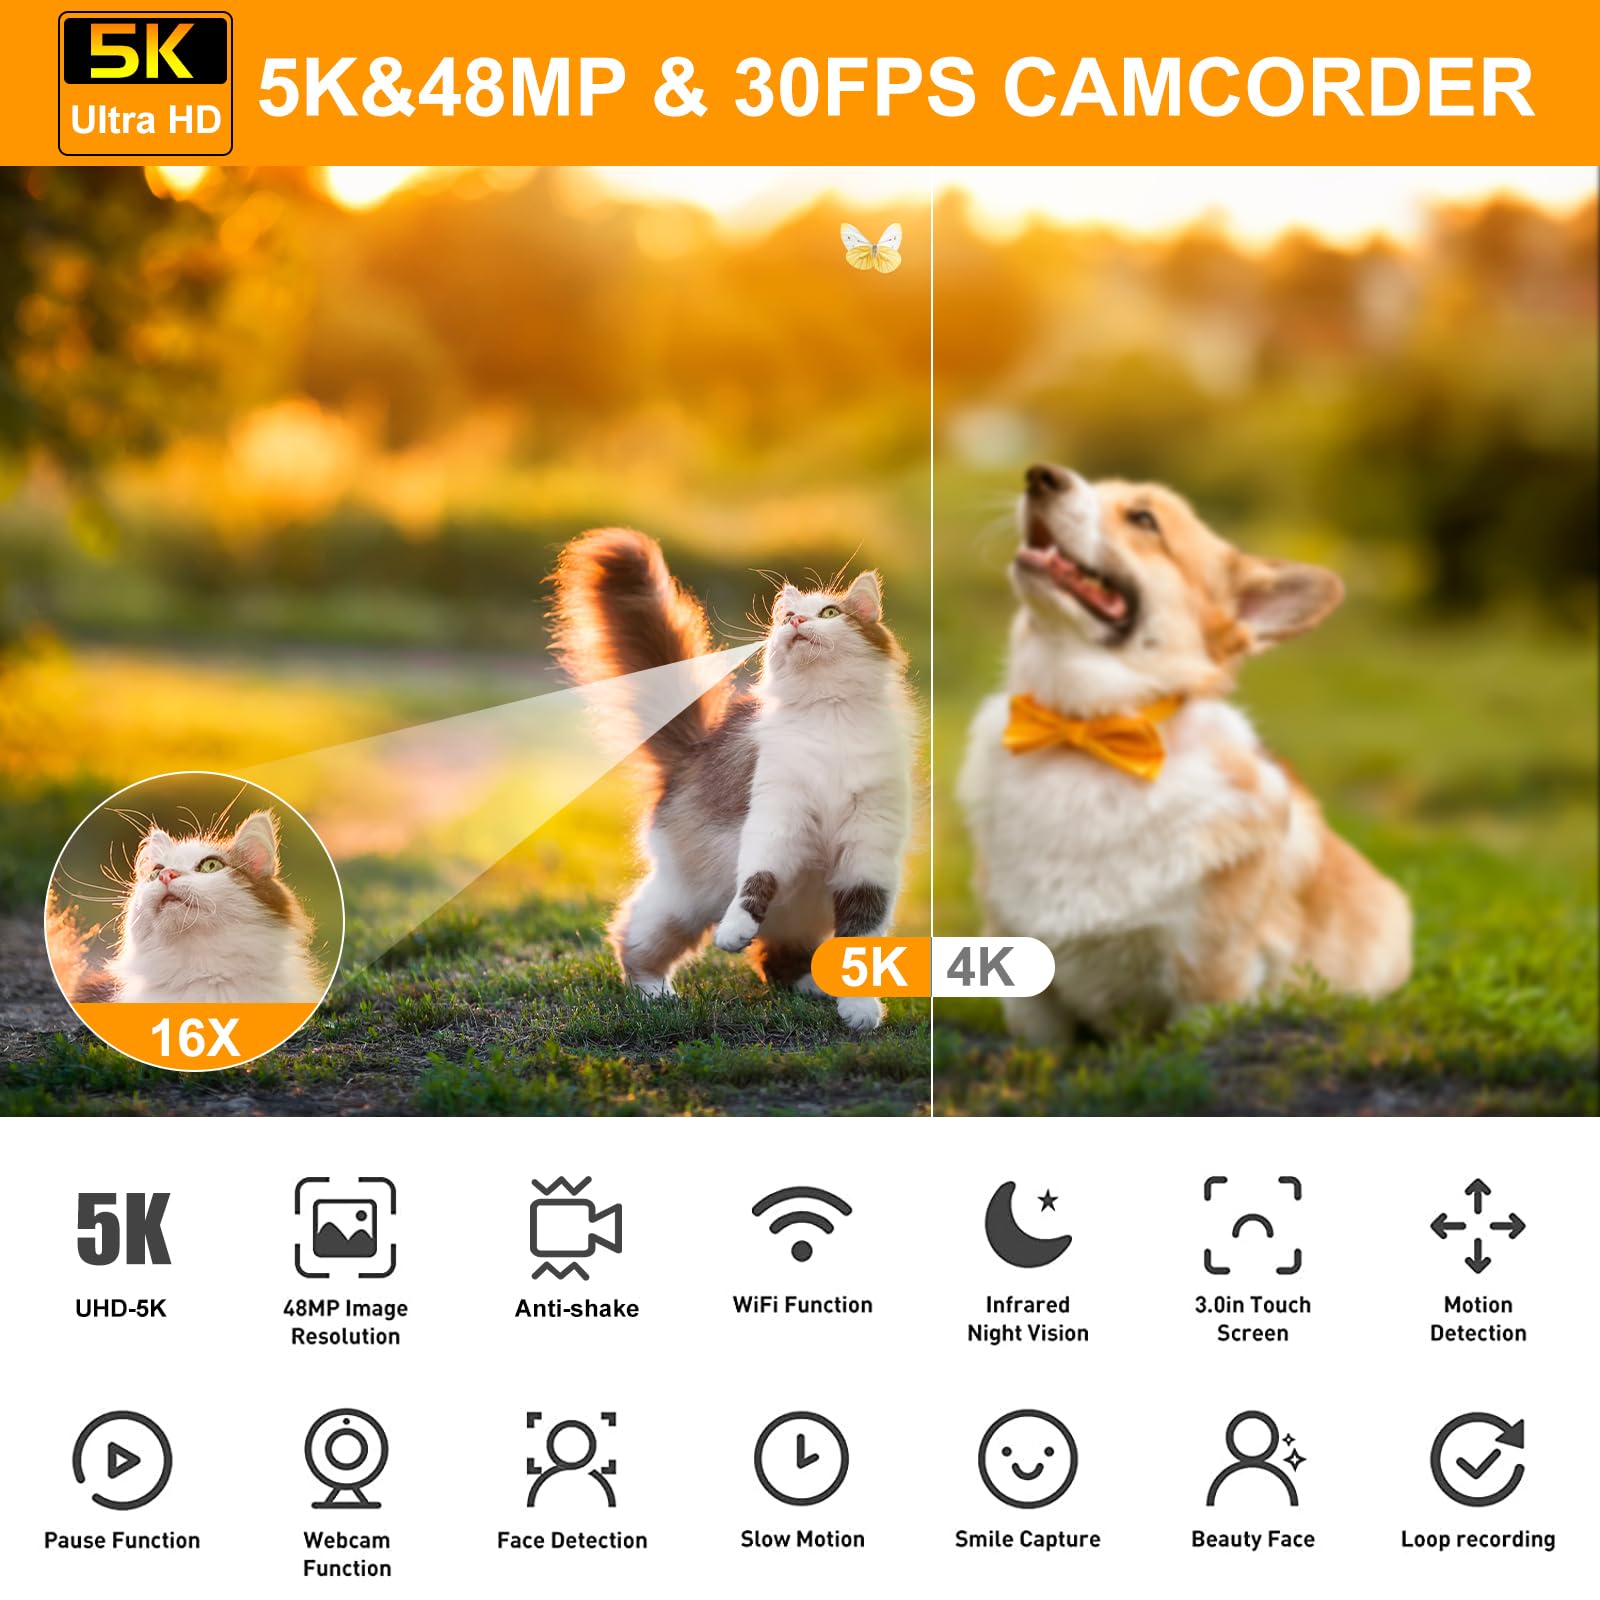 5K Video Camera Camcorder 48MP UHD WiFi IR Night Vision Vlogging Camera for YouTube 16X Digital Zoom 3” Touch Screen Camera Recorder with Microphone, Handheld Stabilizer, Lens Hood, Remote,2 Batteries